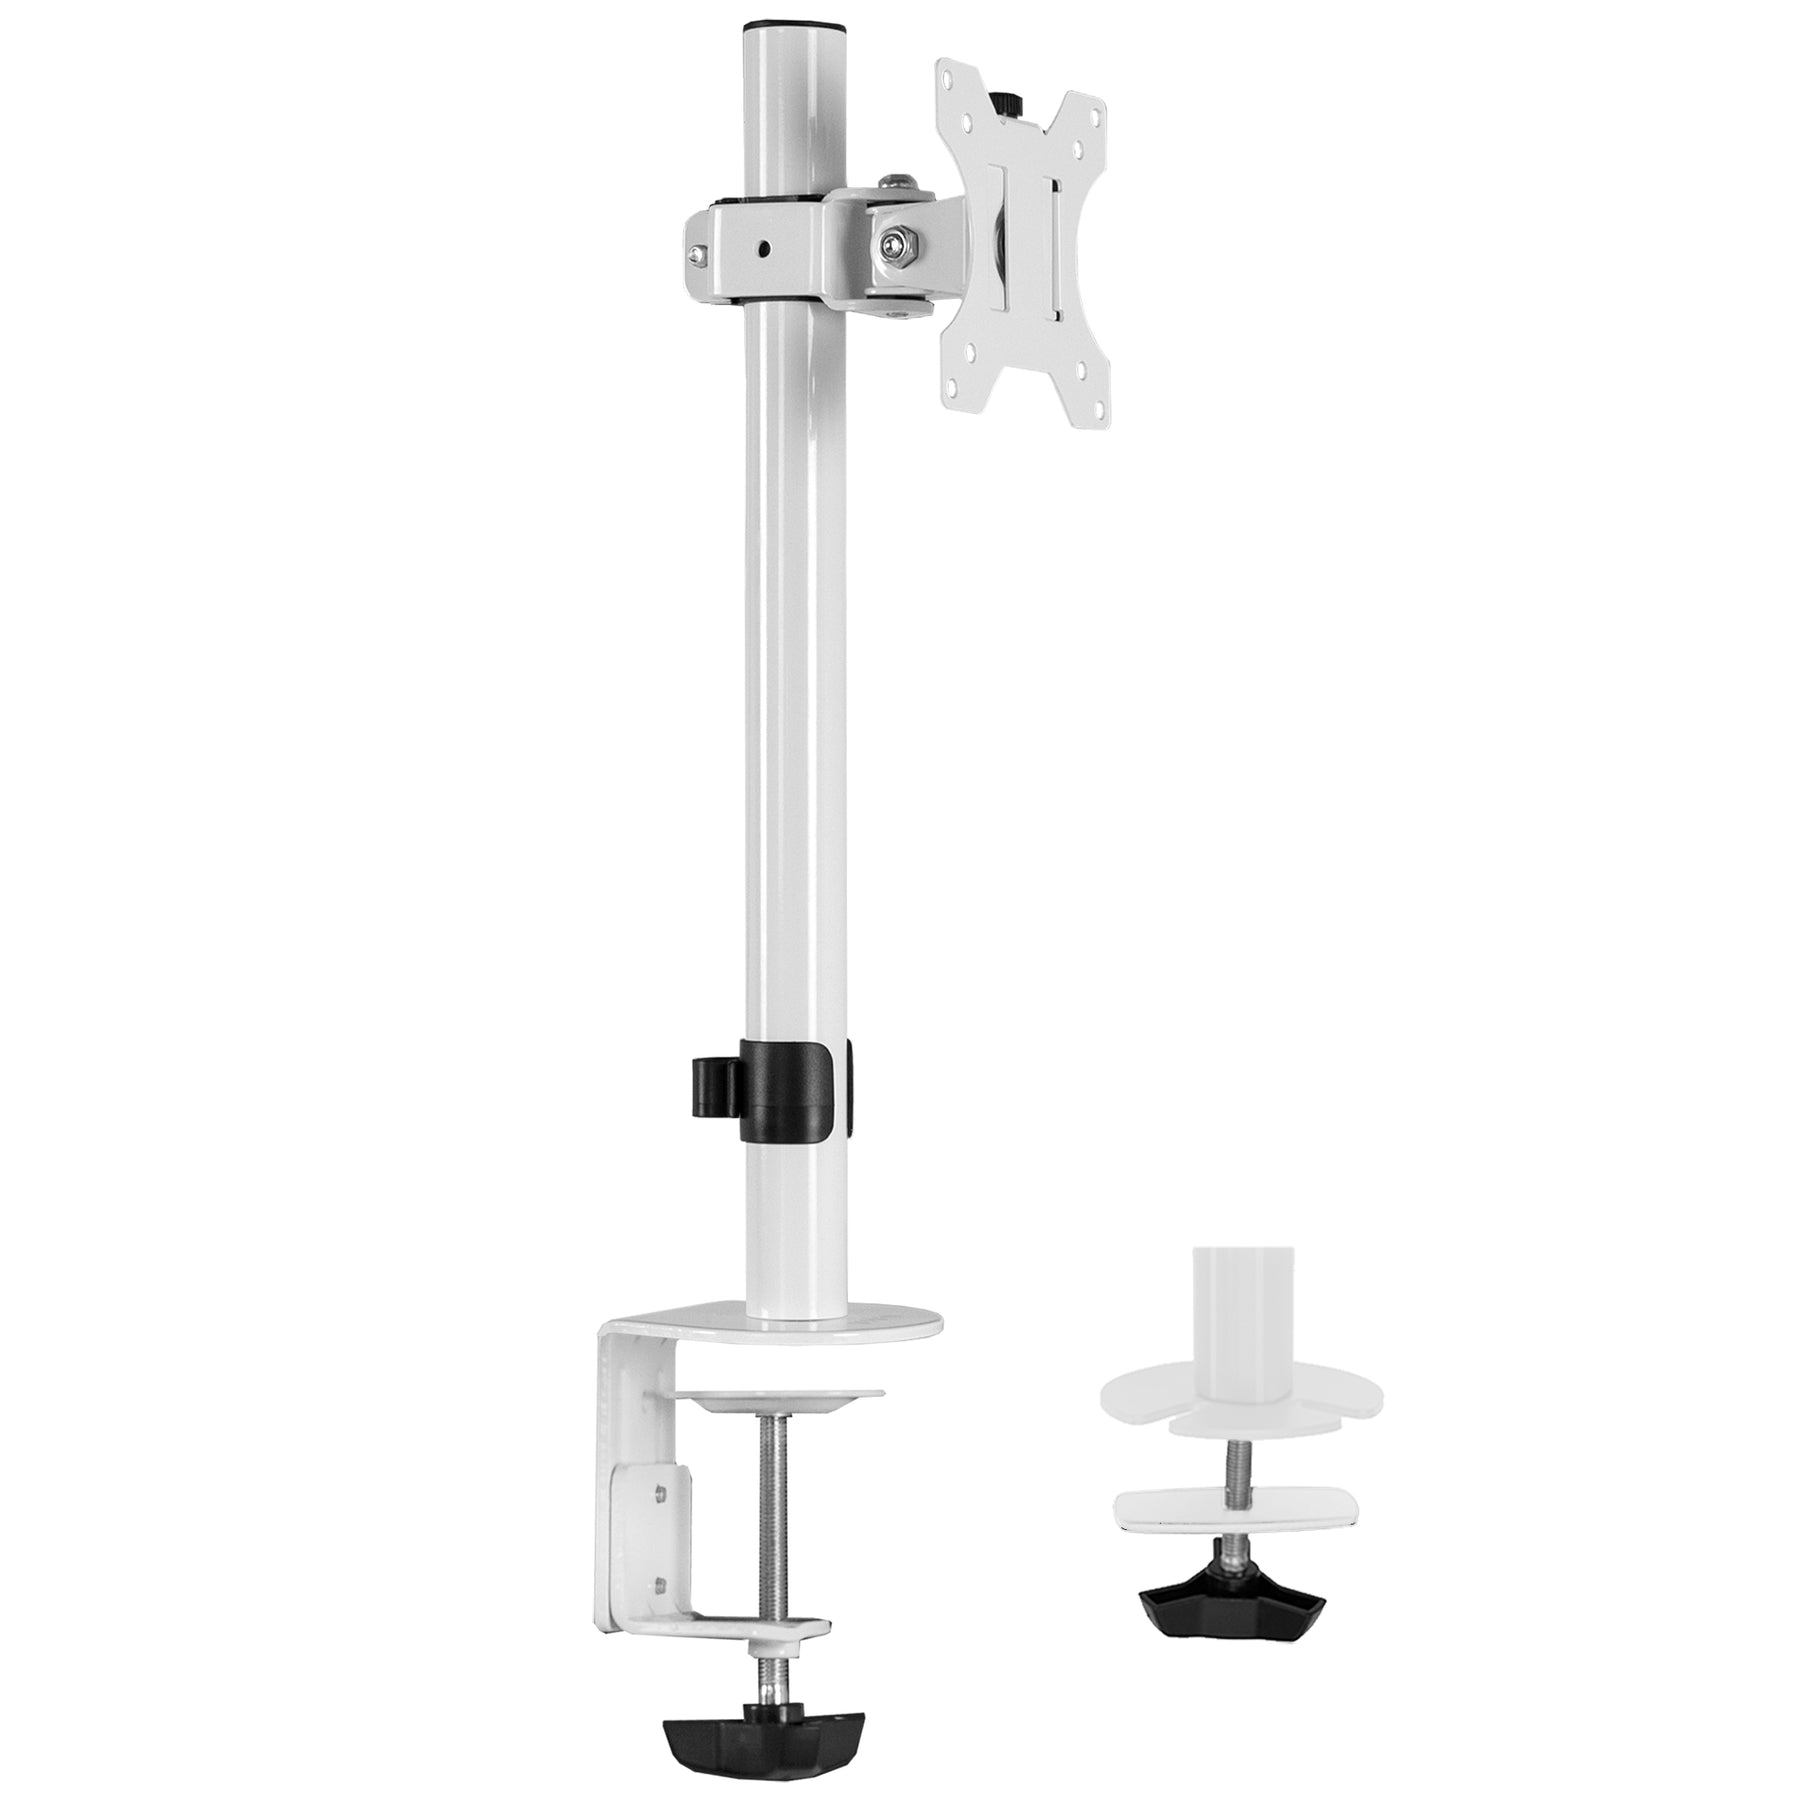 VIVO Single Monitor Arm Desk Mount, Holds Screens up to 32 inch Regular and  38 inch Ultrawide, Fully Adjustable Stand with C-Clamp and Grommet Base,  VESA 75x75mm or 100x100mm, Black, STAND-V001… 